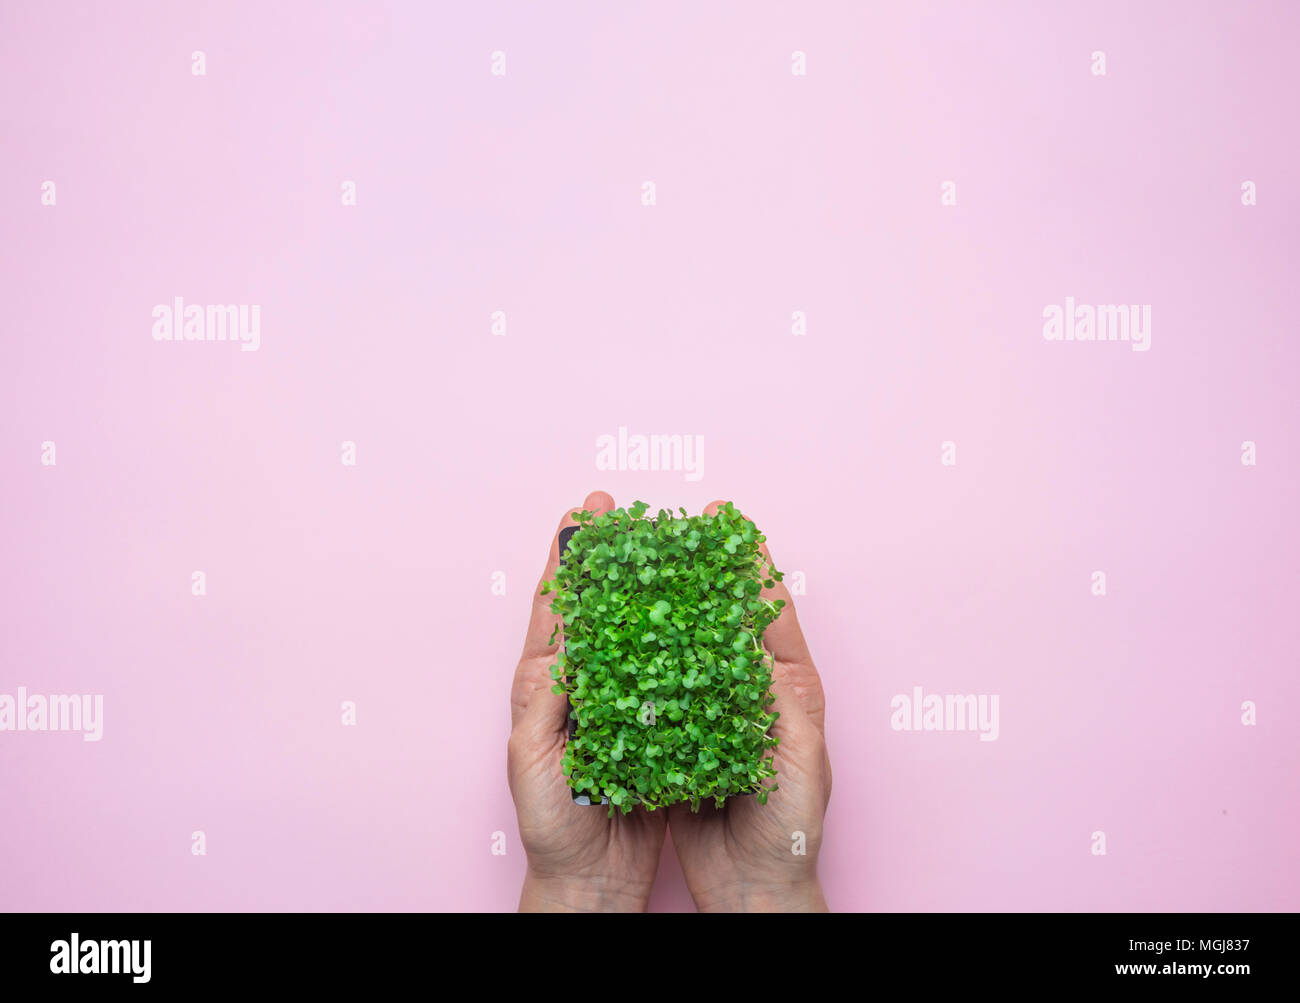 Young Caucasian Woman Holding in Hand Pot with Fresh Green Sprouts of Water Cress on Pastel Pink Background. Gardening Healthy Plant Based Diet Food G Stock Photo